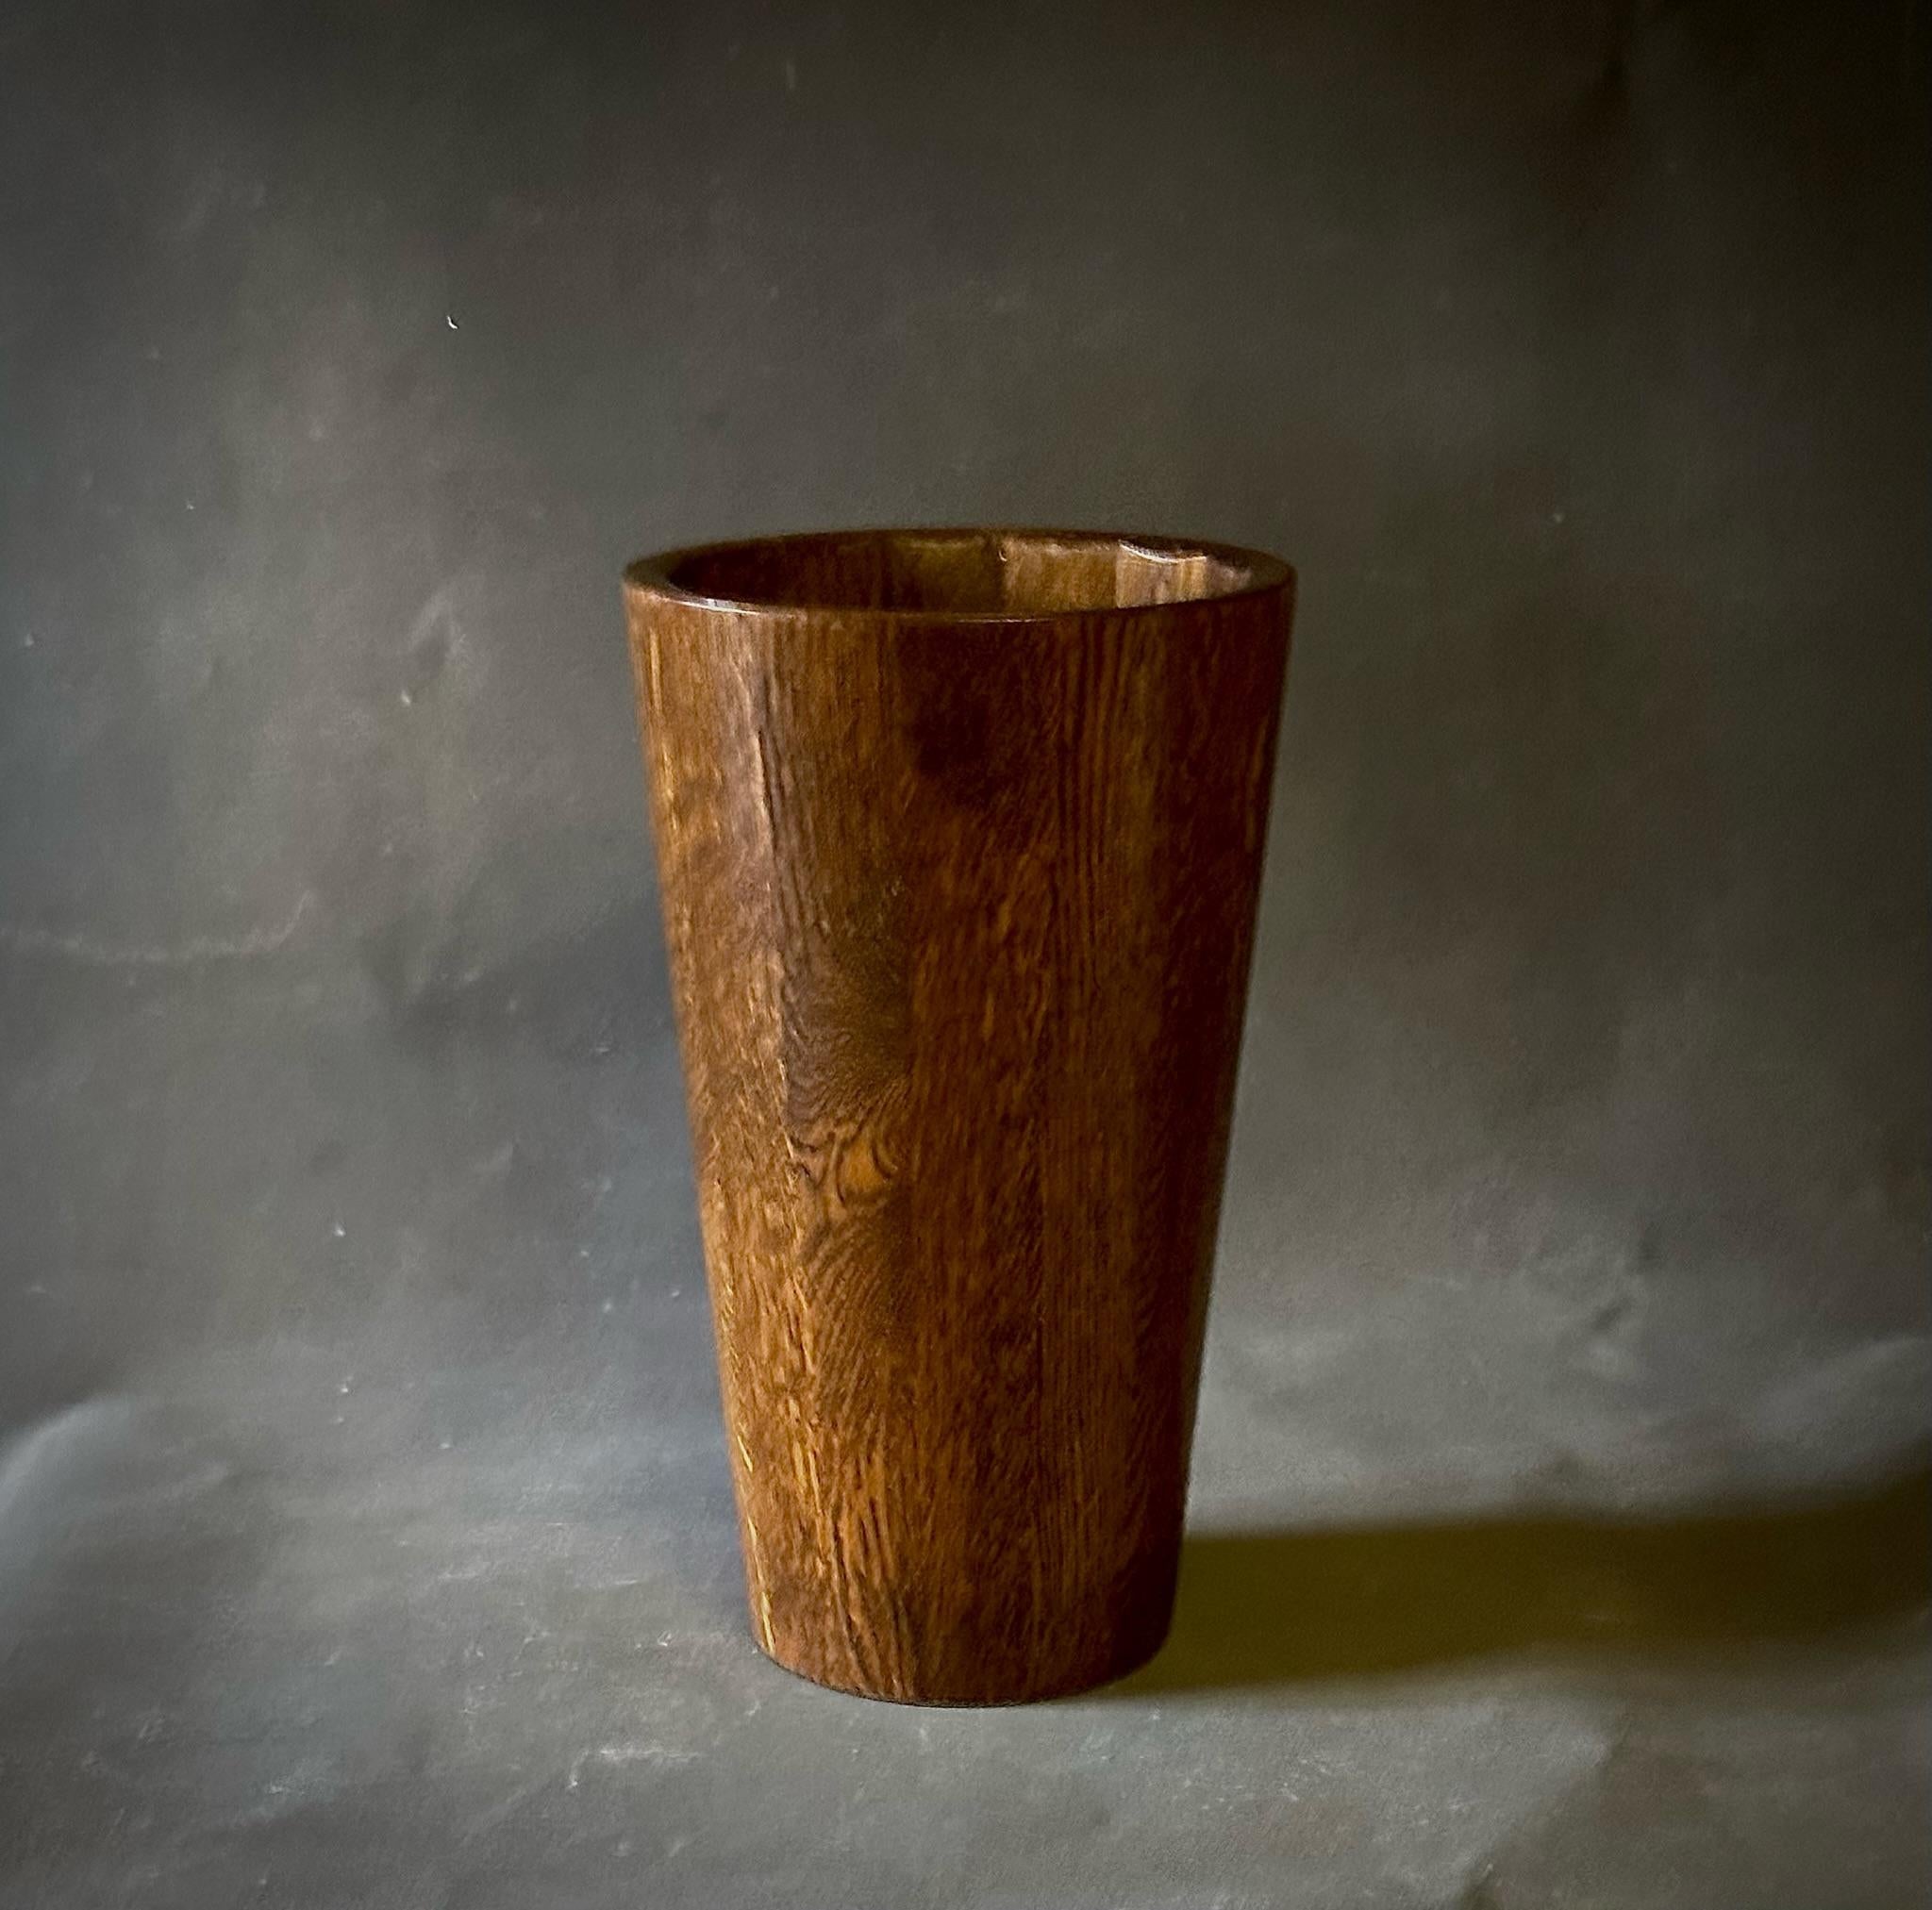 Belgian midcentury wooden umbrella stand or waste bin with a simple, cylindrical shape. Warm and understated.

Belgium, circa 1940.

Dimensions: 11 W x 11 D x 18 H.